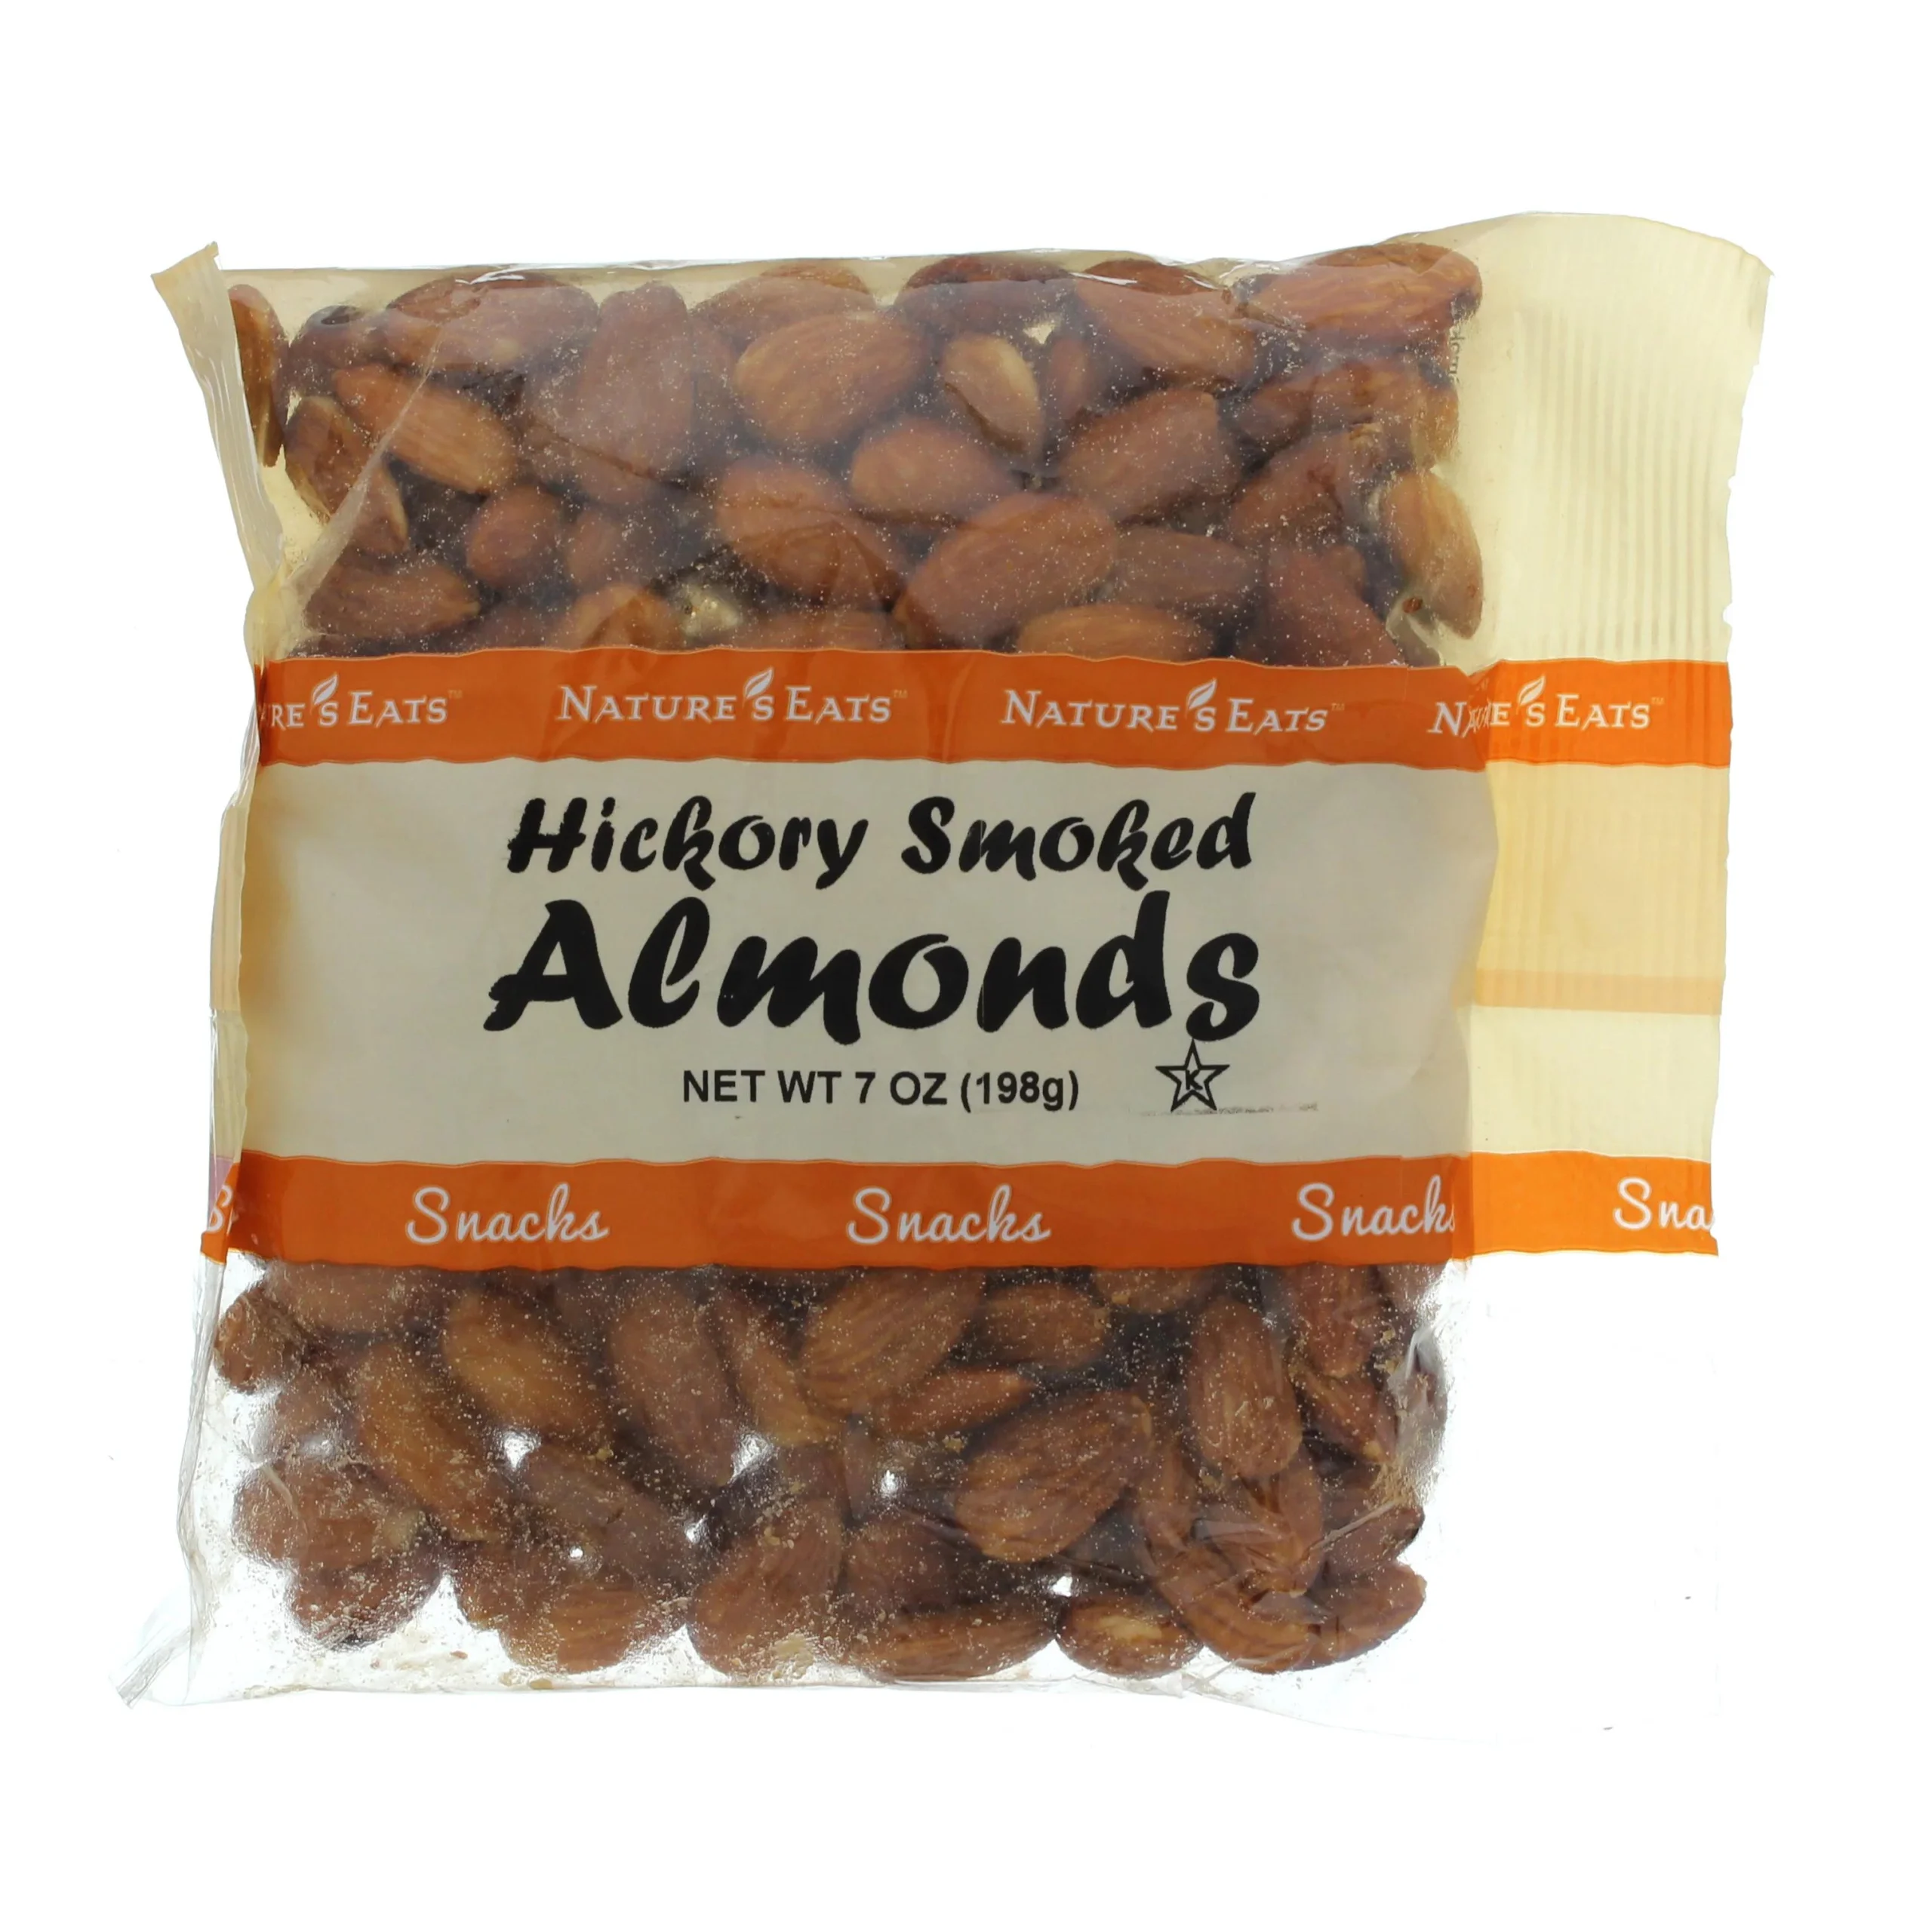 hickory smoked nuts - Why don t they sell hickory nuts